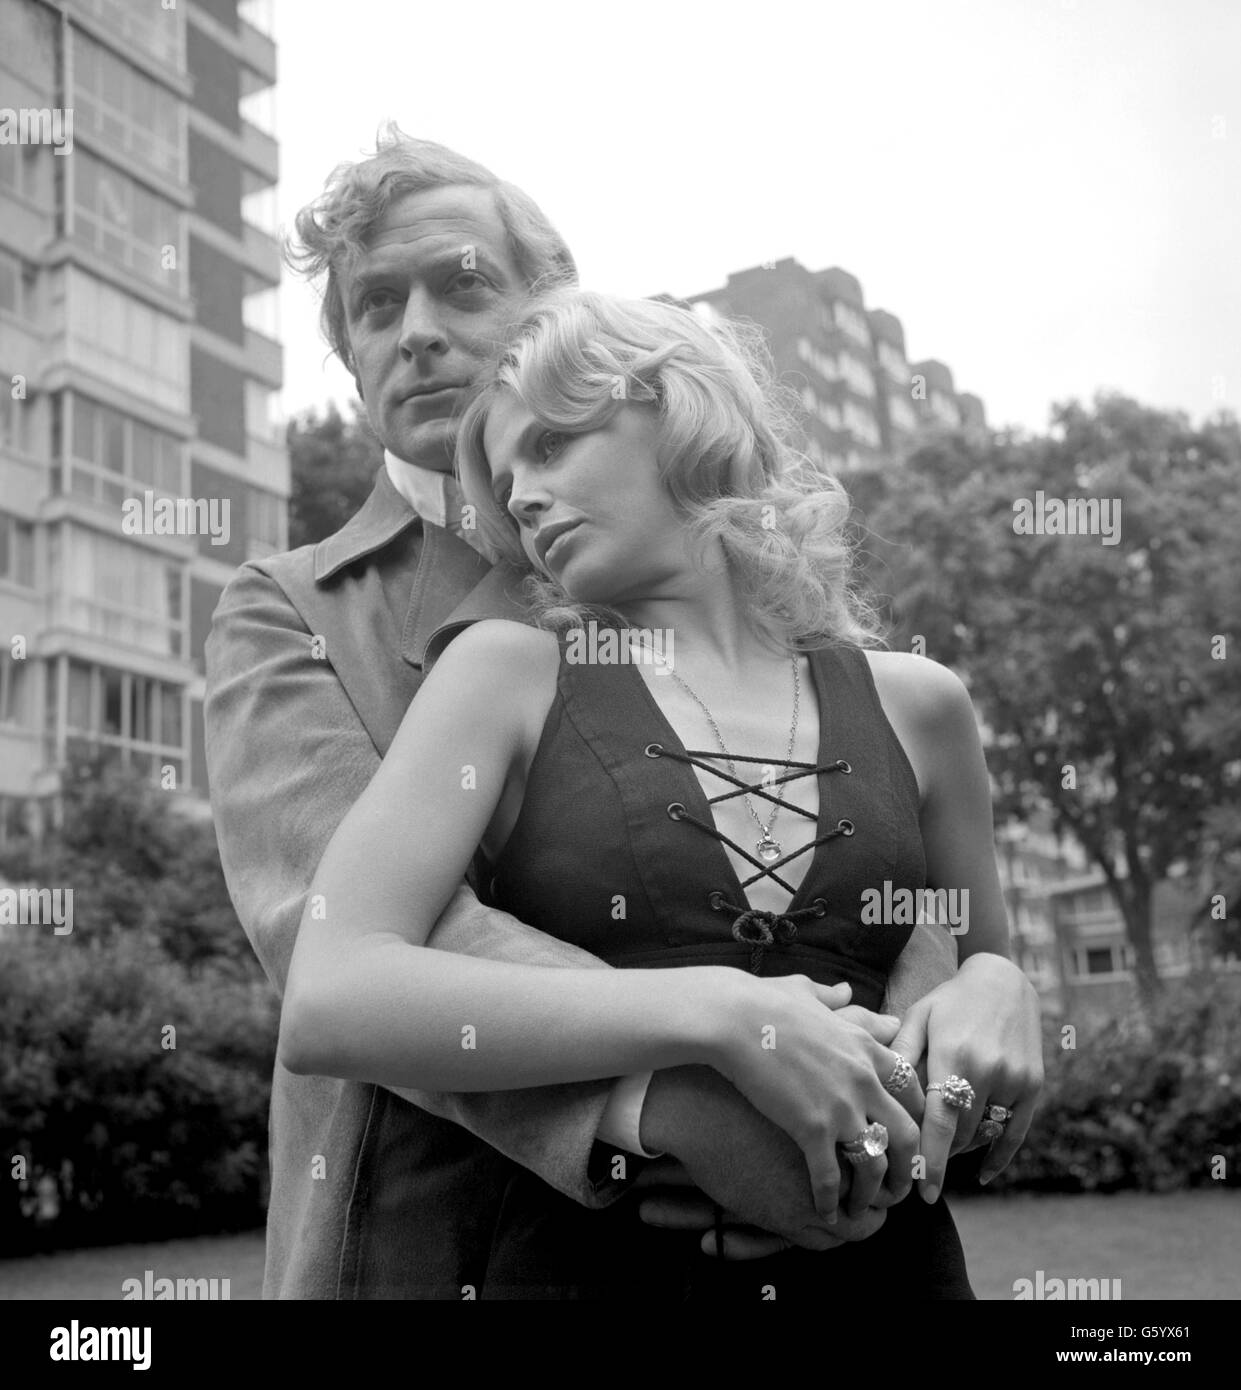 Michael Caine, playing a gangster, with Britt Ekland at Paddington, London, where they started work today on 'Get Carter', a new film directed by Mike Hodges. After two days on location in a luxury flat in Paddington, filming will continue at Newcastle-On-Tyne, where most of the the film will be shot. Stock Photo